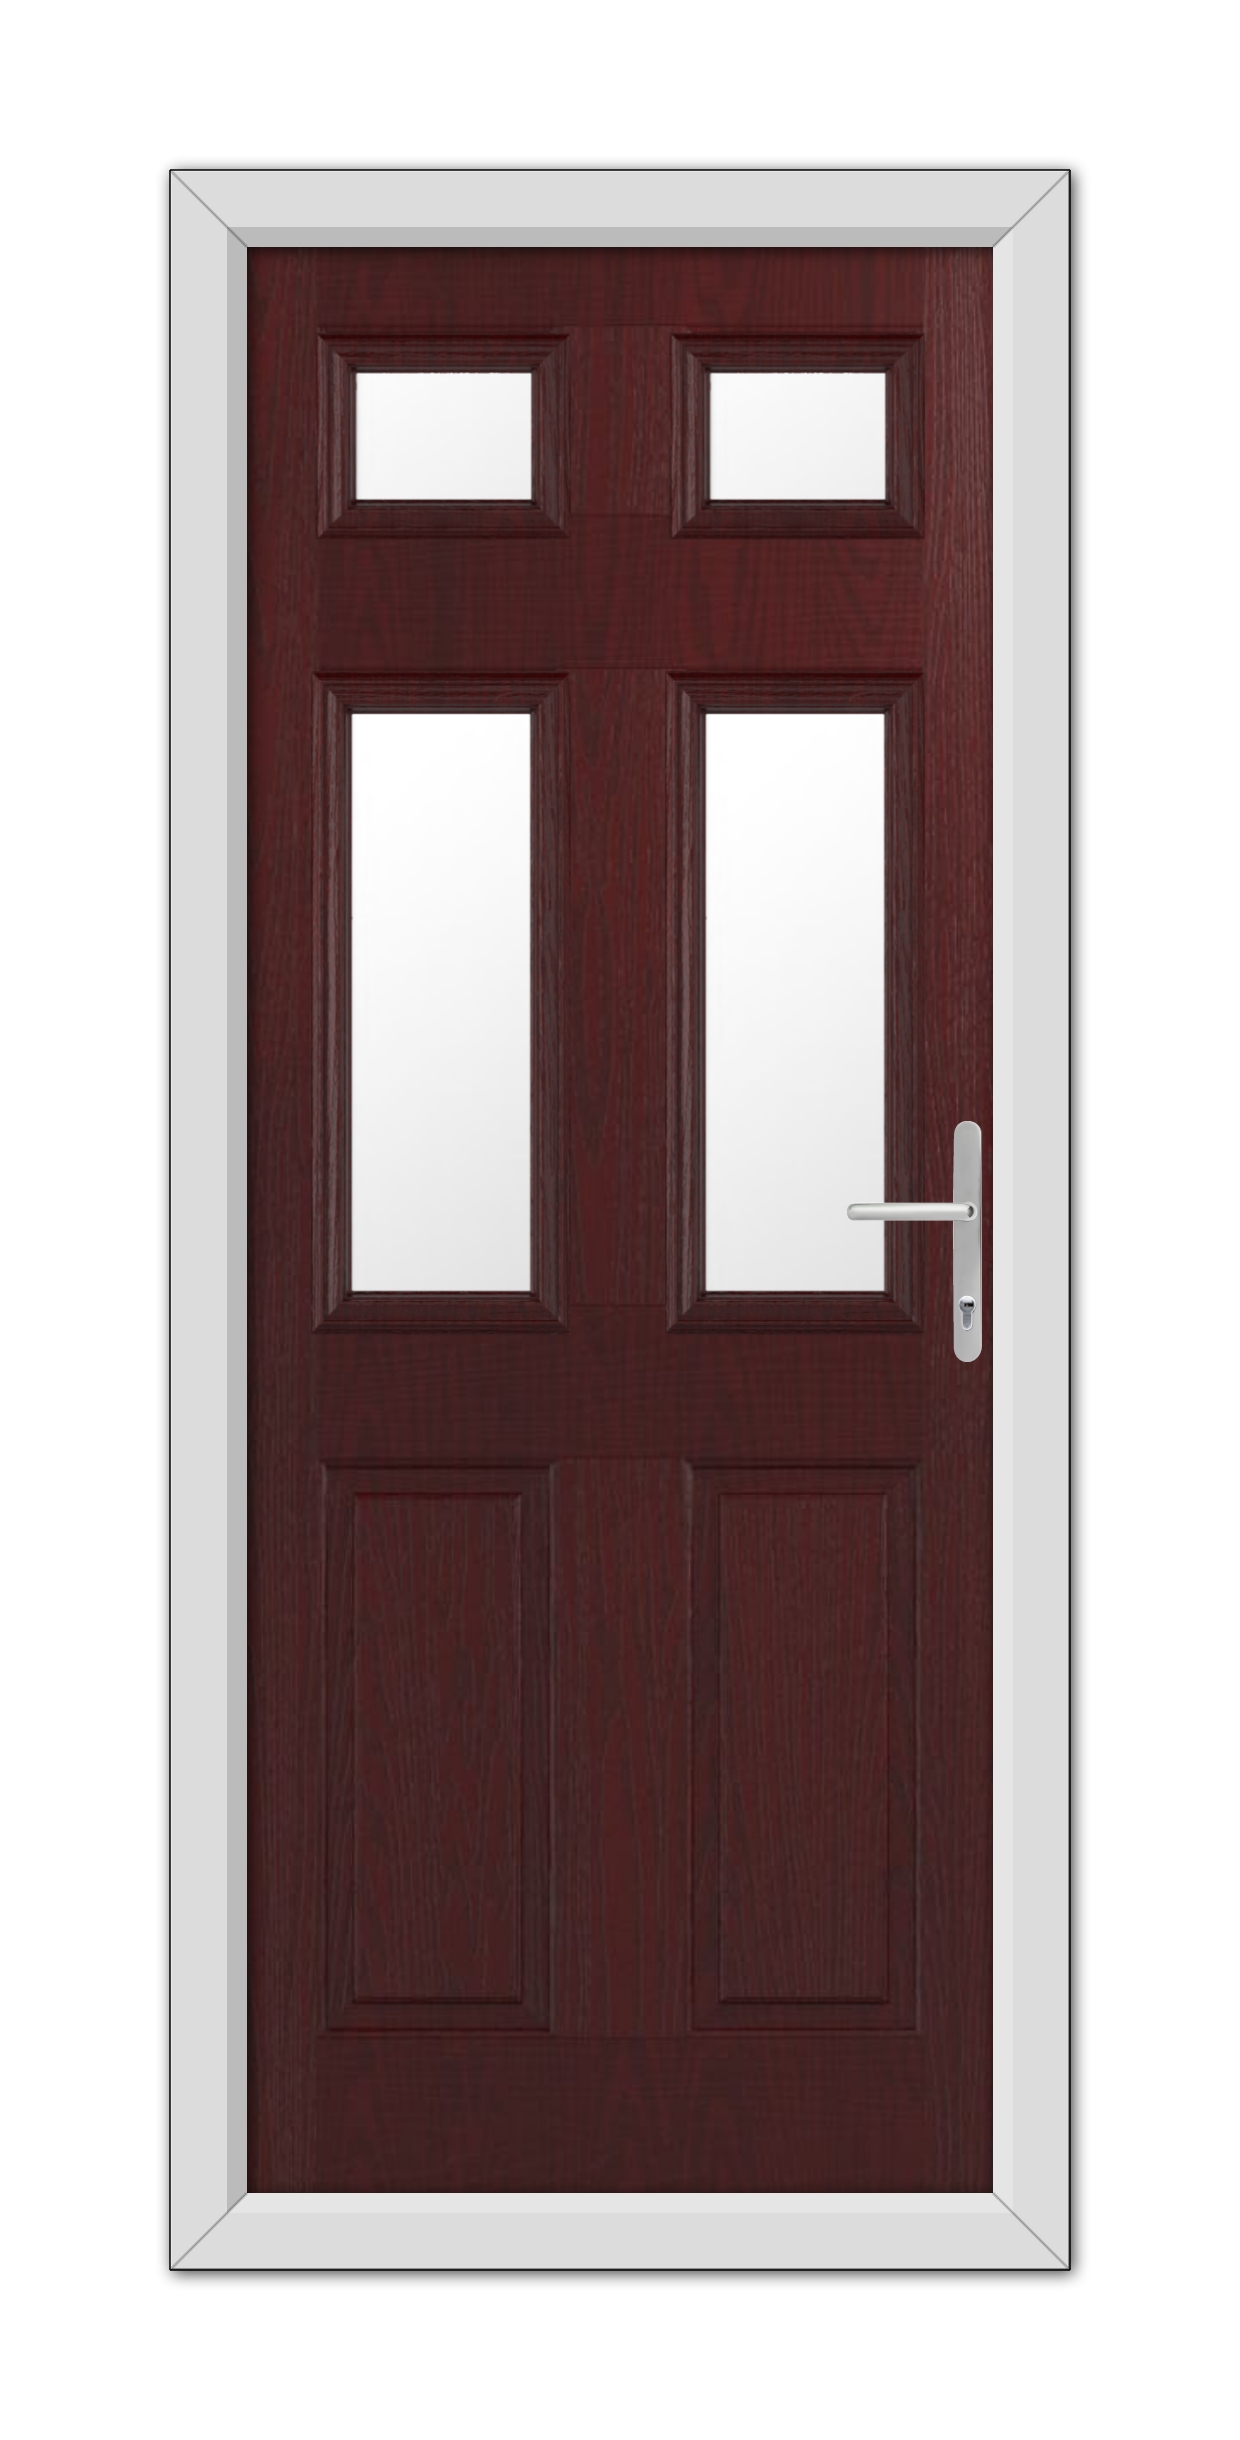 A Rosewood Middleton Glazed 4 Composite Door 48mm Timber Core with two vertical glass panels near the top, featuring a silver handle, set in a white frame.